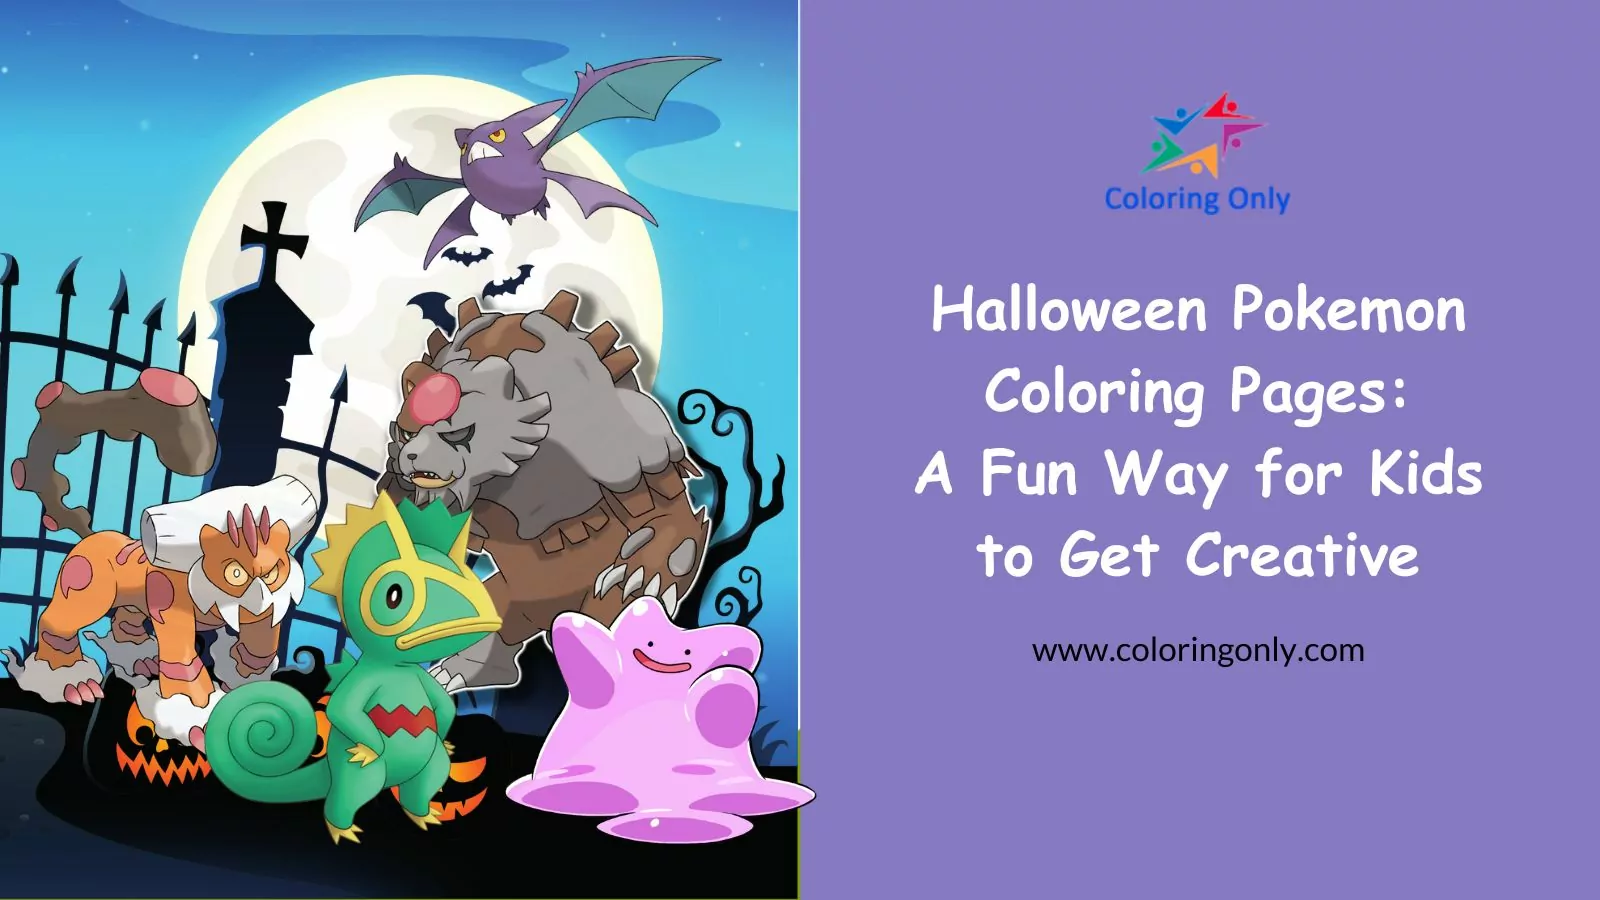 Halloween Pokemon Coloring Pages: A Fun Way for Kids to Get Creative